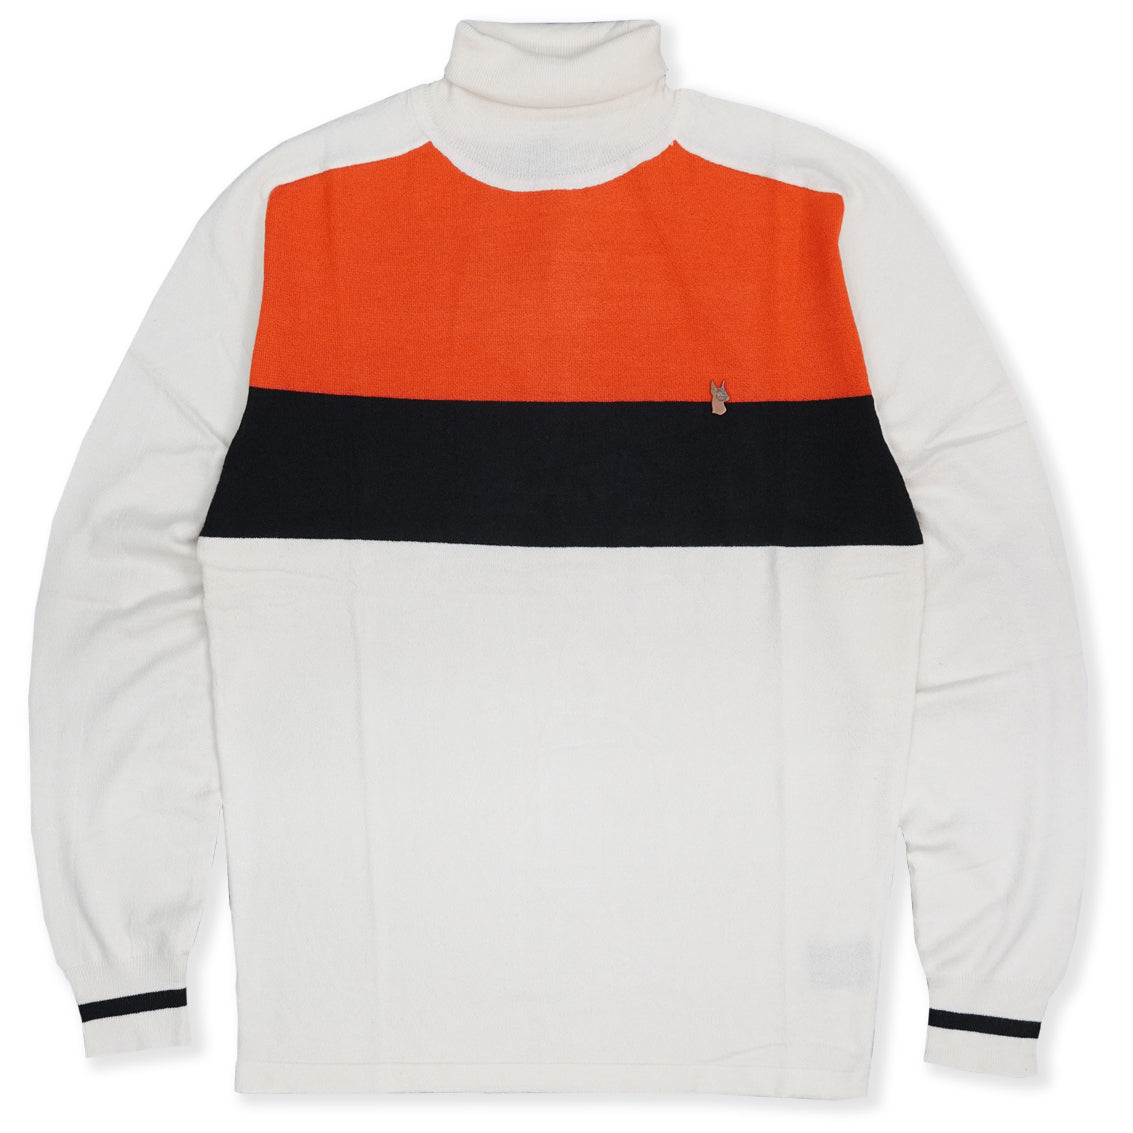 M4000 Turtle neck Knit Sweater - Natural